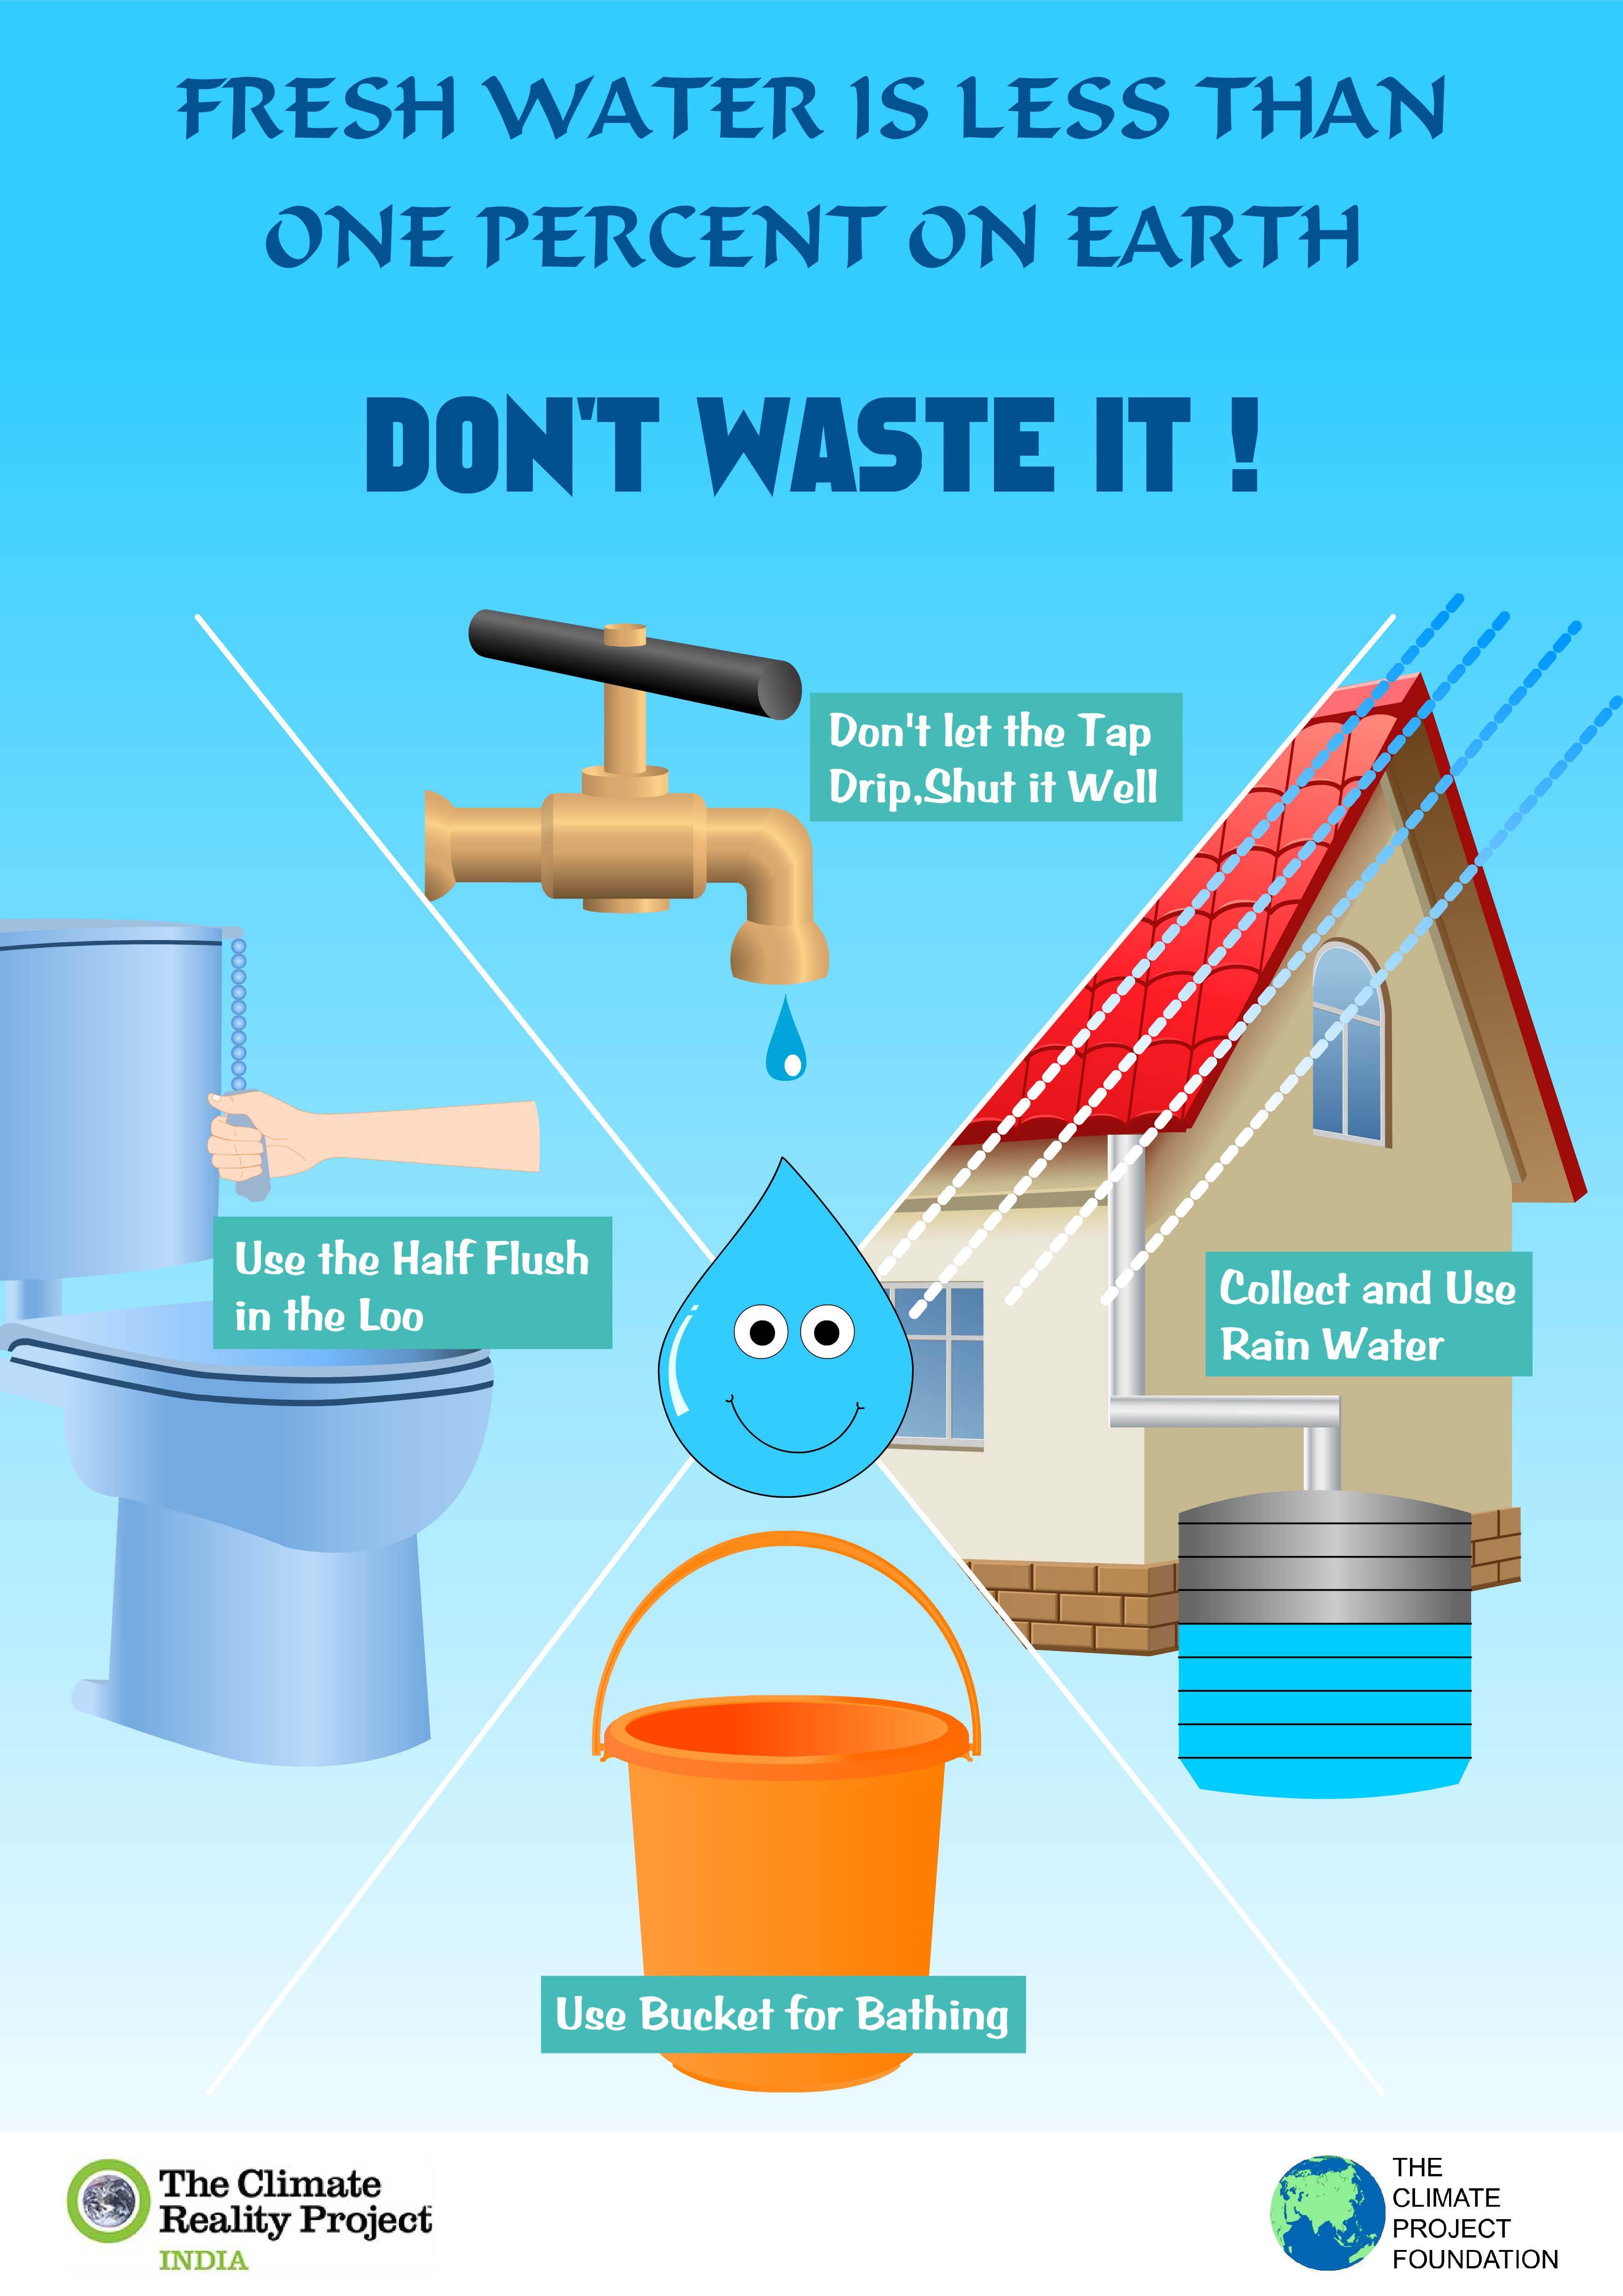 Don’t Waste water